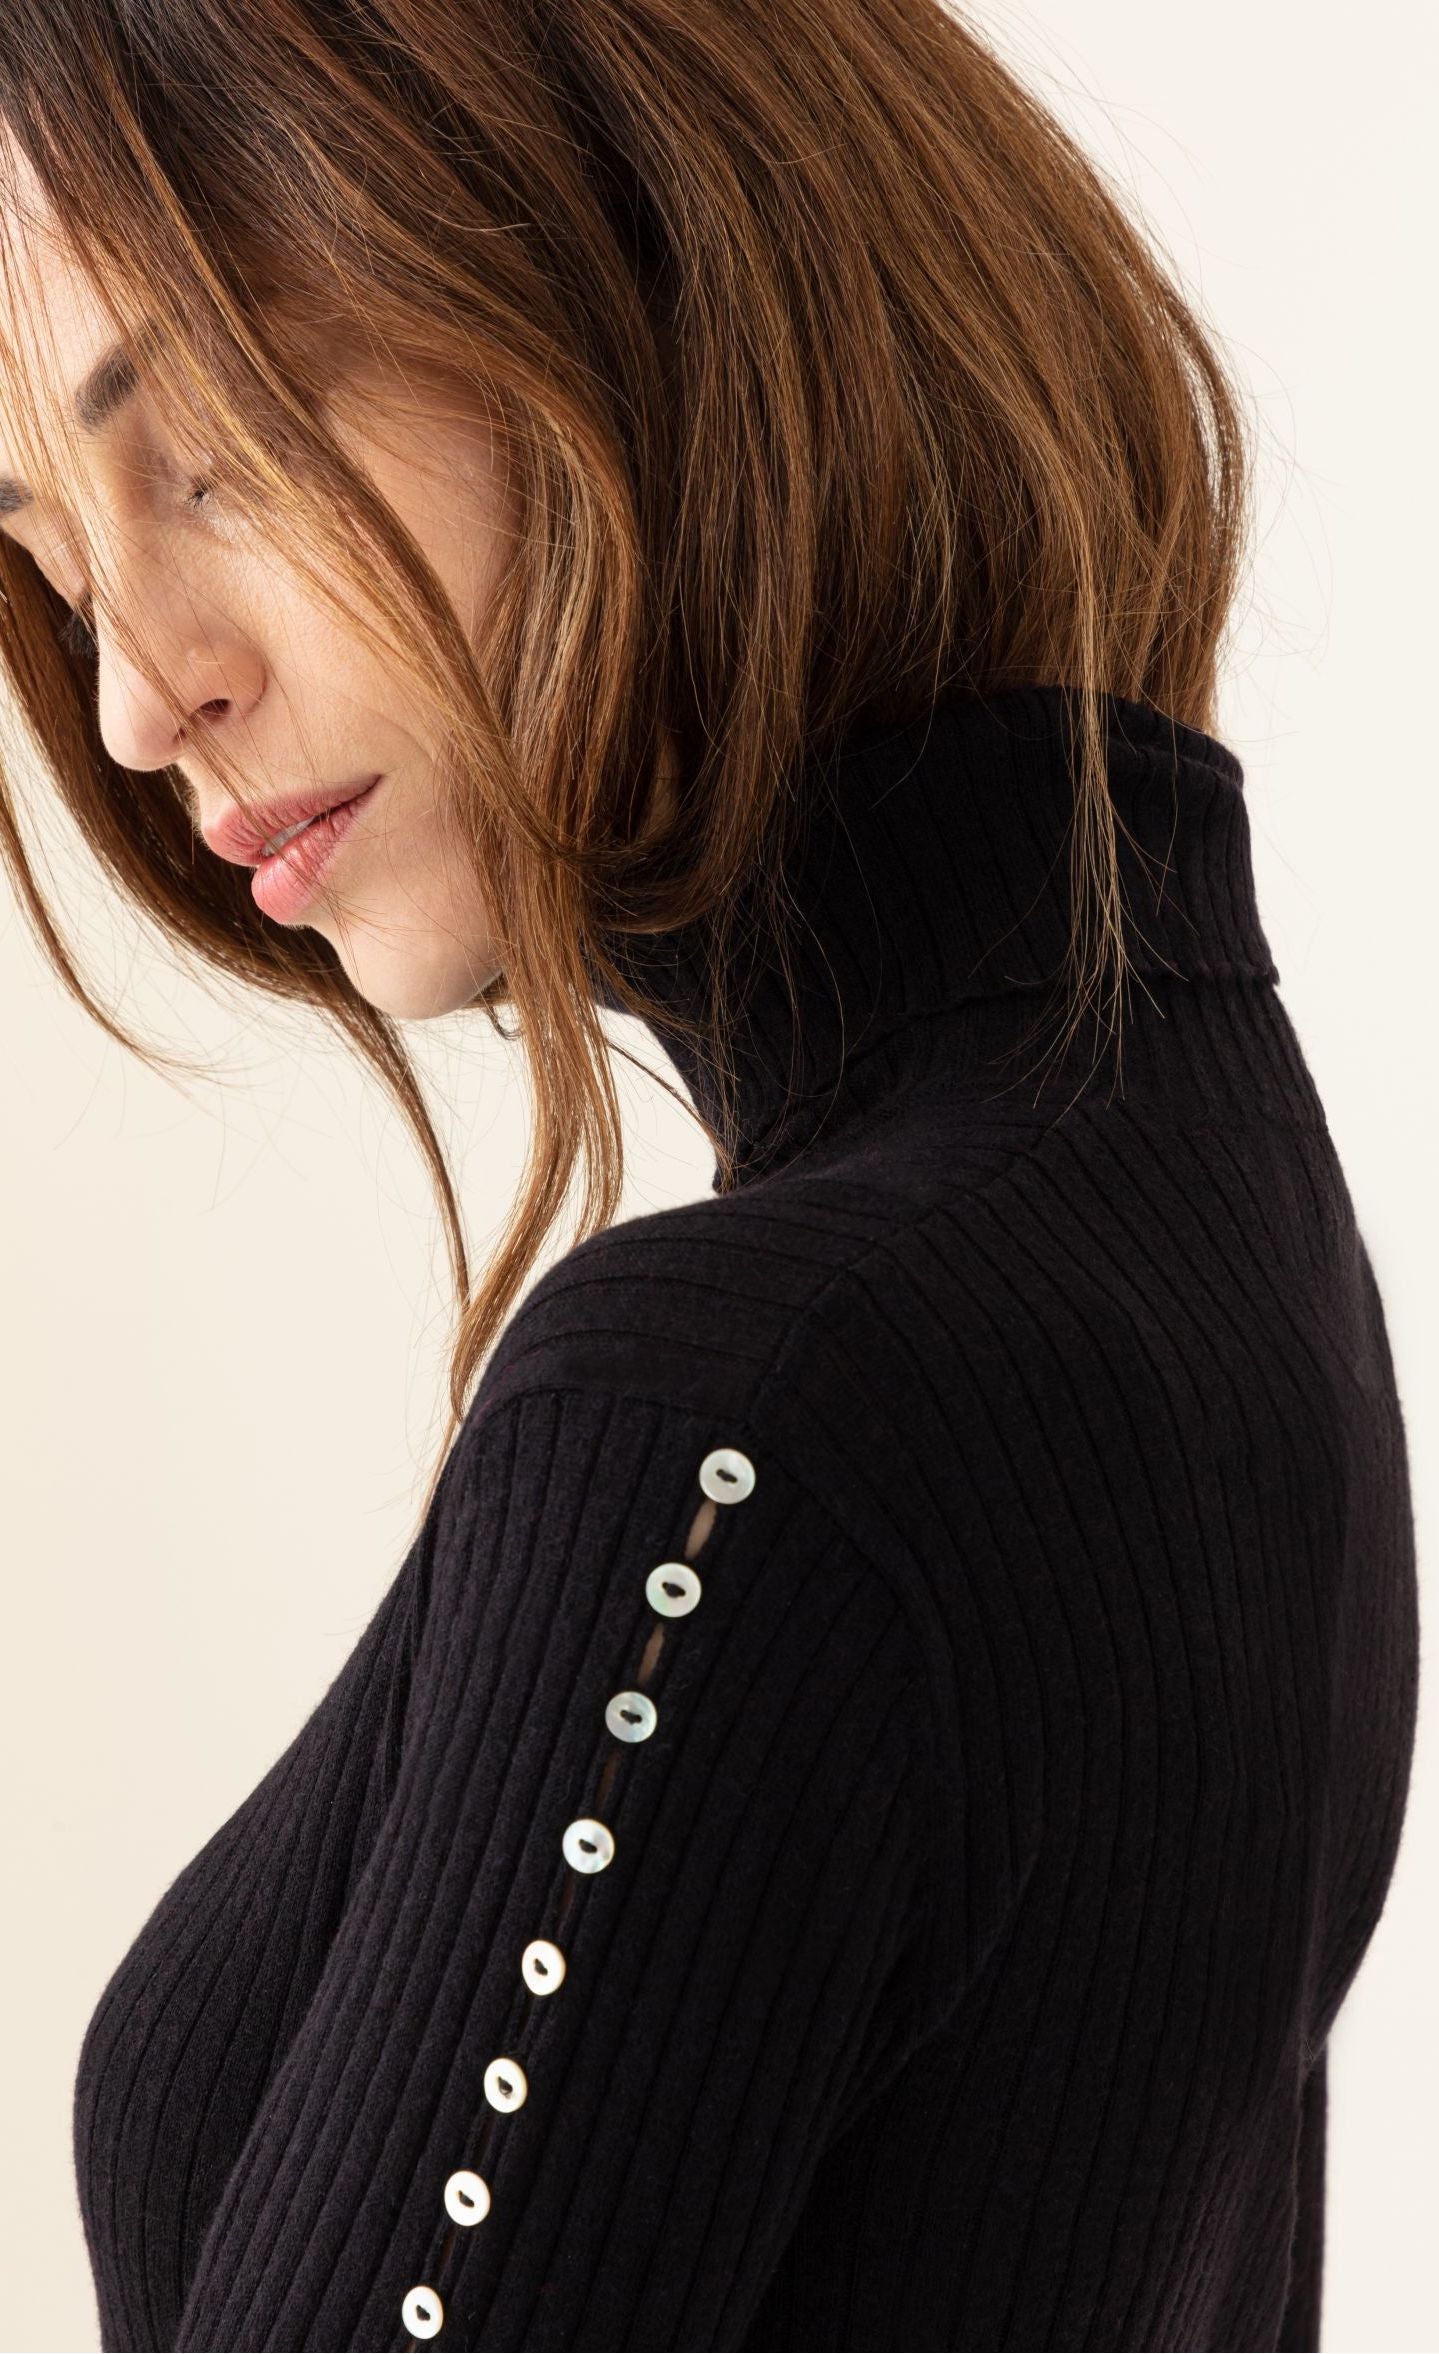 Left side close up view of a woman wearing the fitted indies kris sweater. This ribbed turtleneck sweater is black with long sleeves that have pearl buttons running down the side.